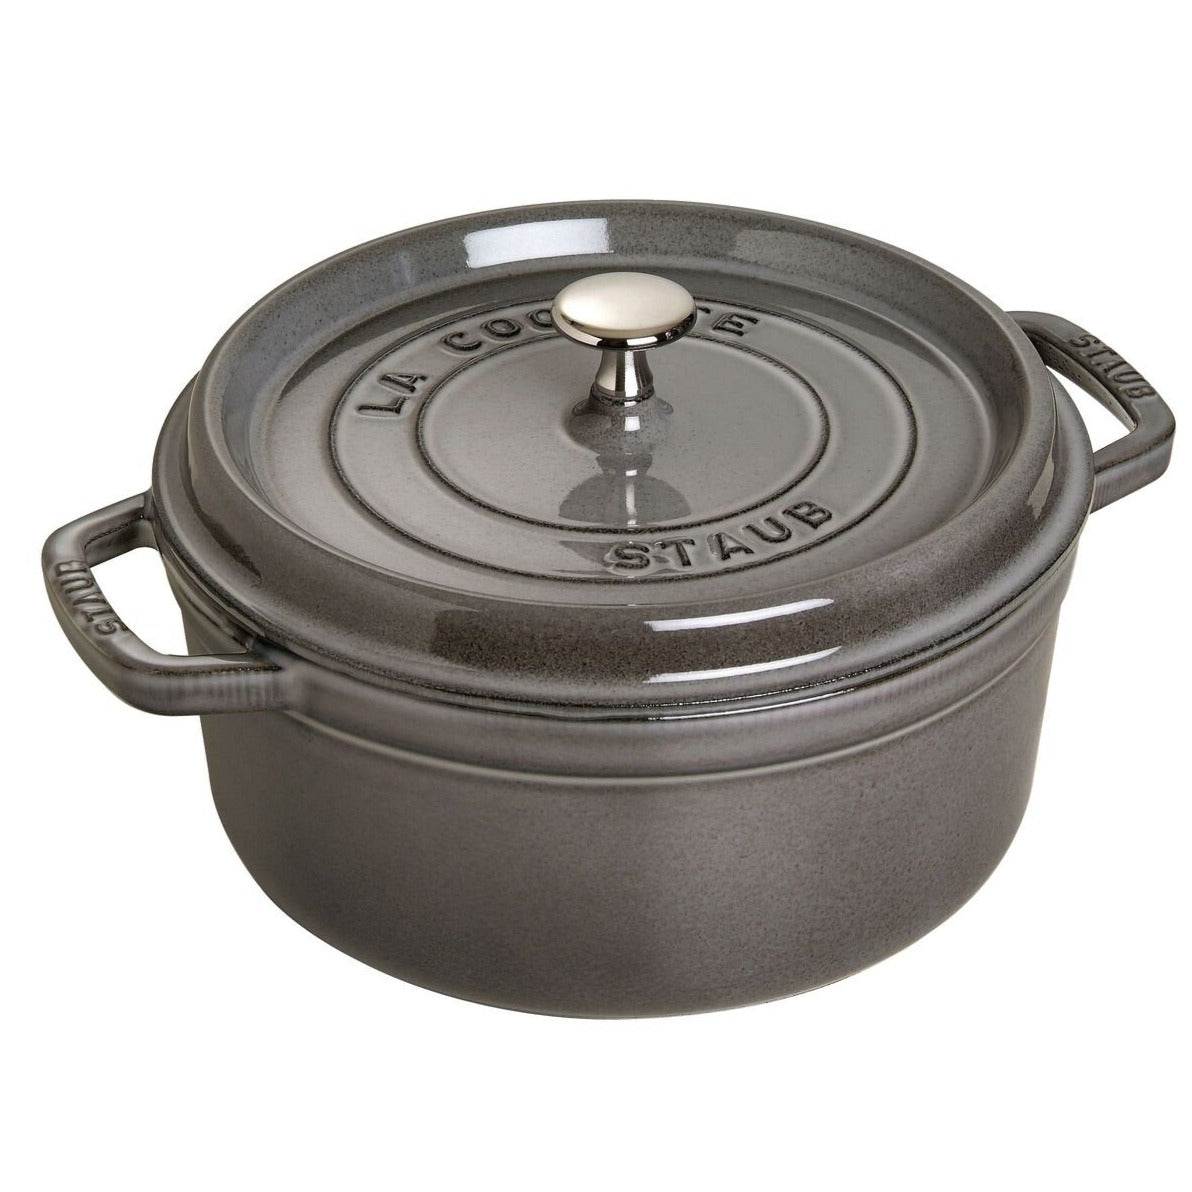 Staub Cast Iron 4-qt Round Cocotte with Glass Lid - Turquoise, 4